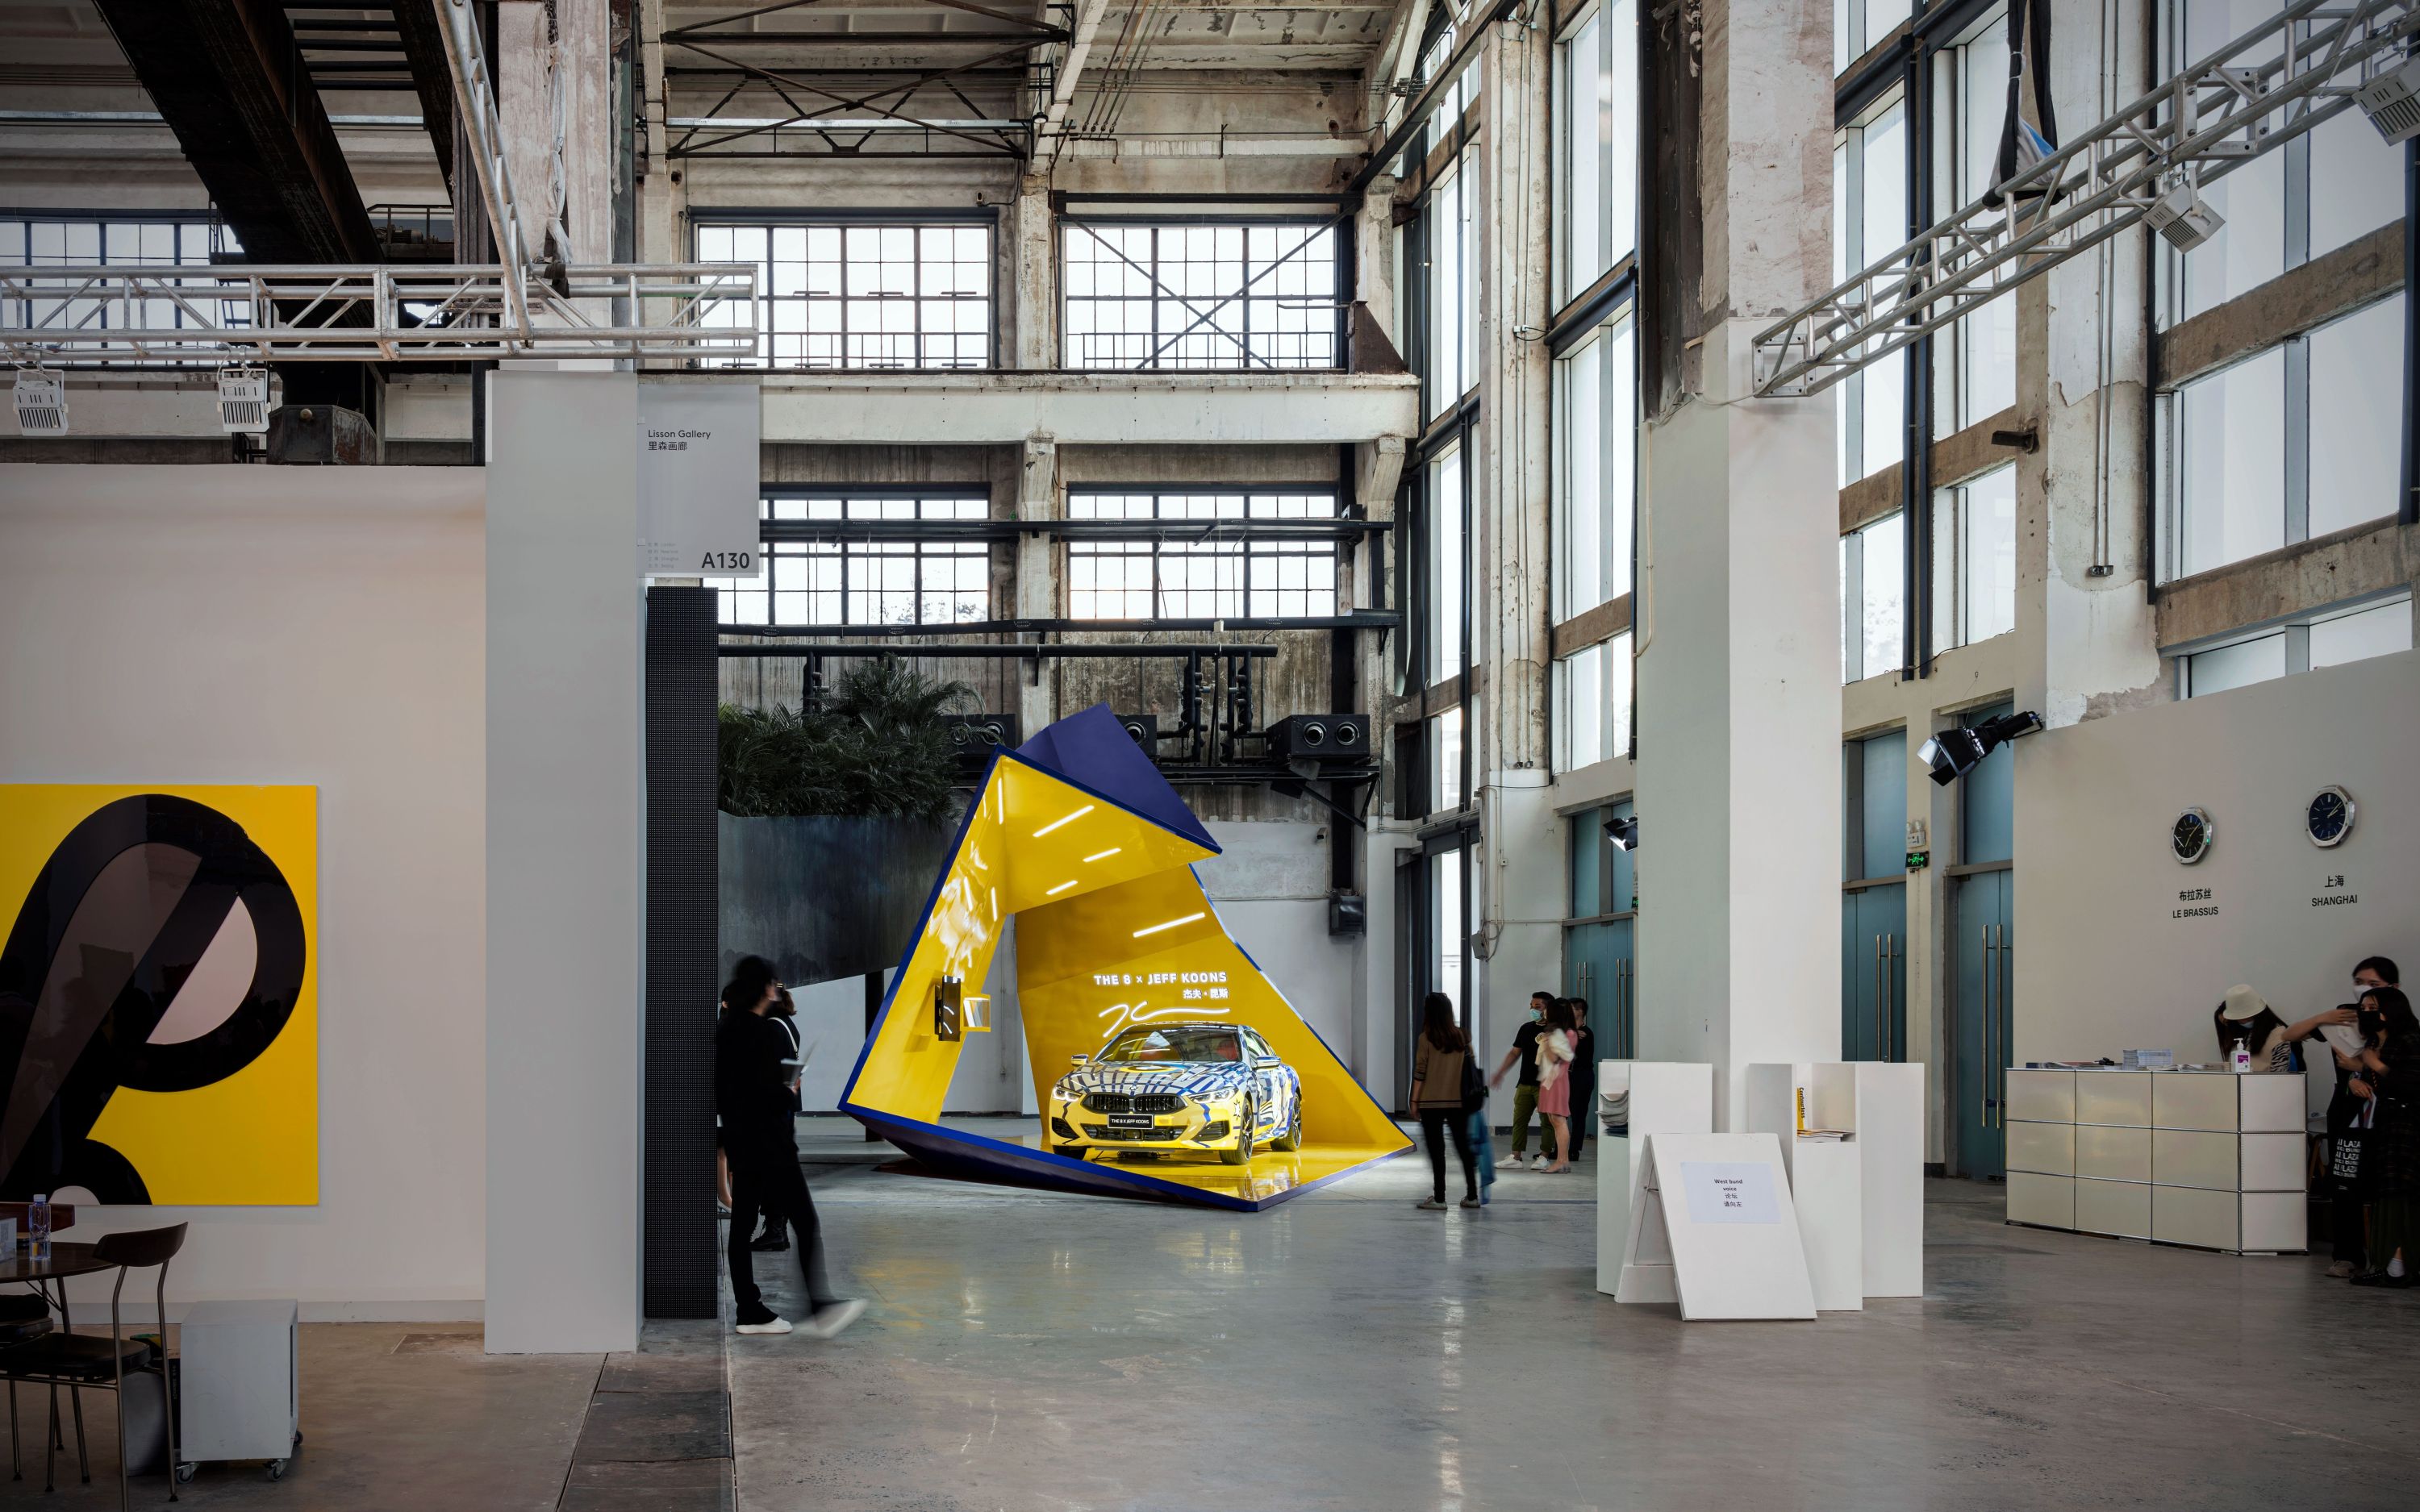 “THE 8 × JEFF KOONS" BMW Limited Edition Collection Appears at Shanghai West Coast Art and Design Expo, with PILLS Responsible for Booth Design